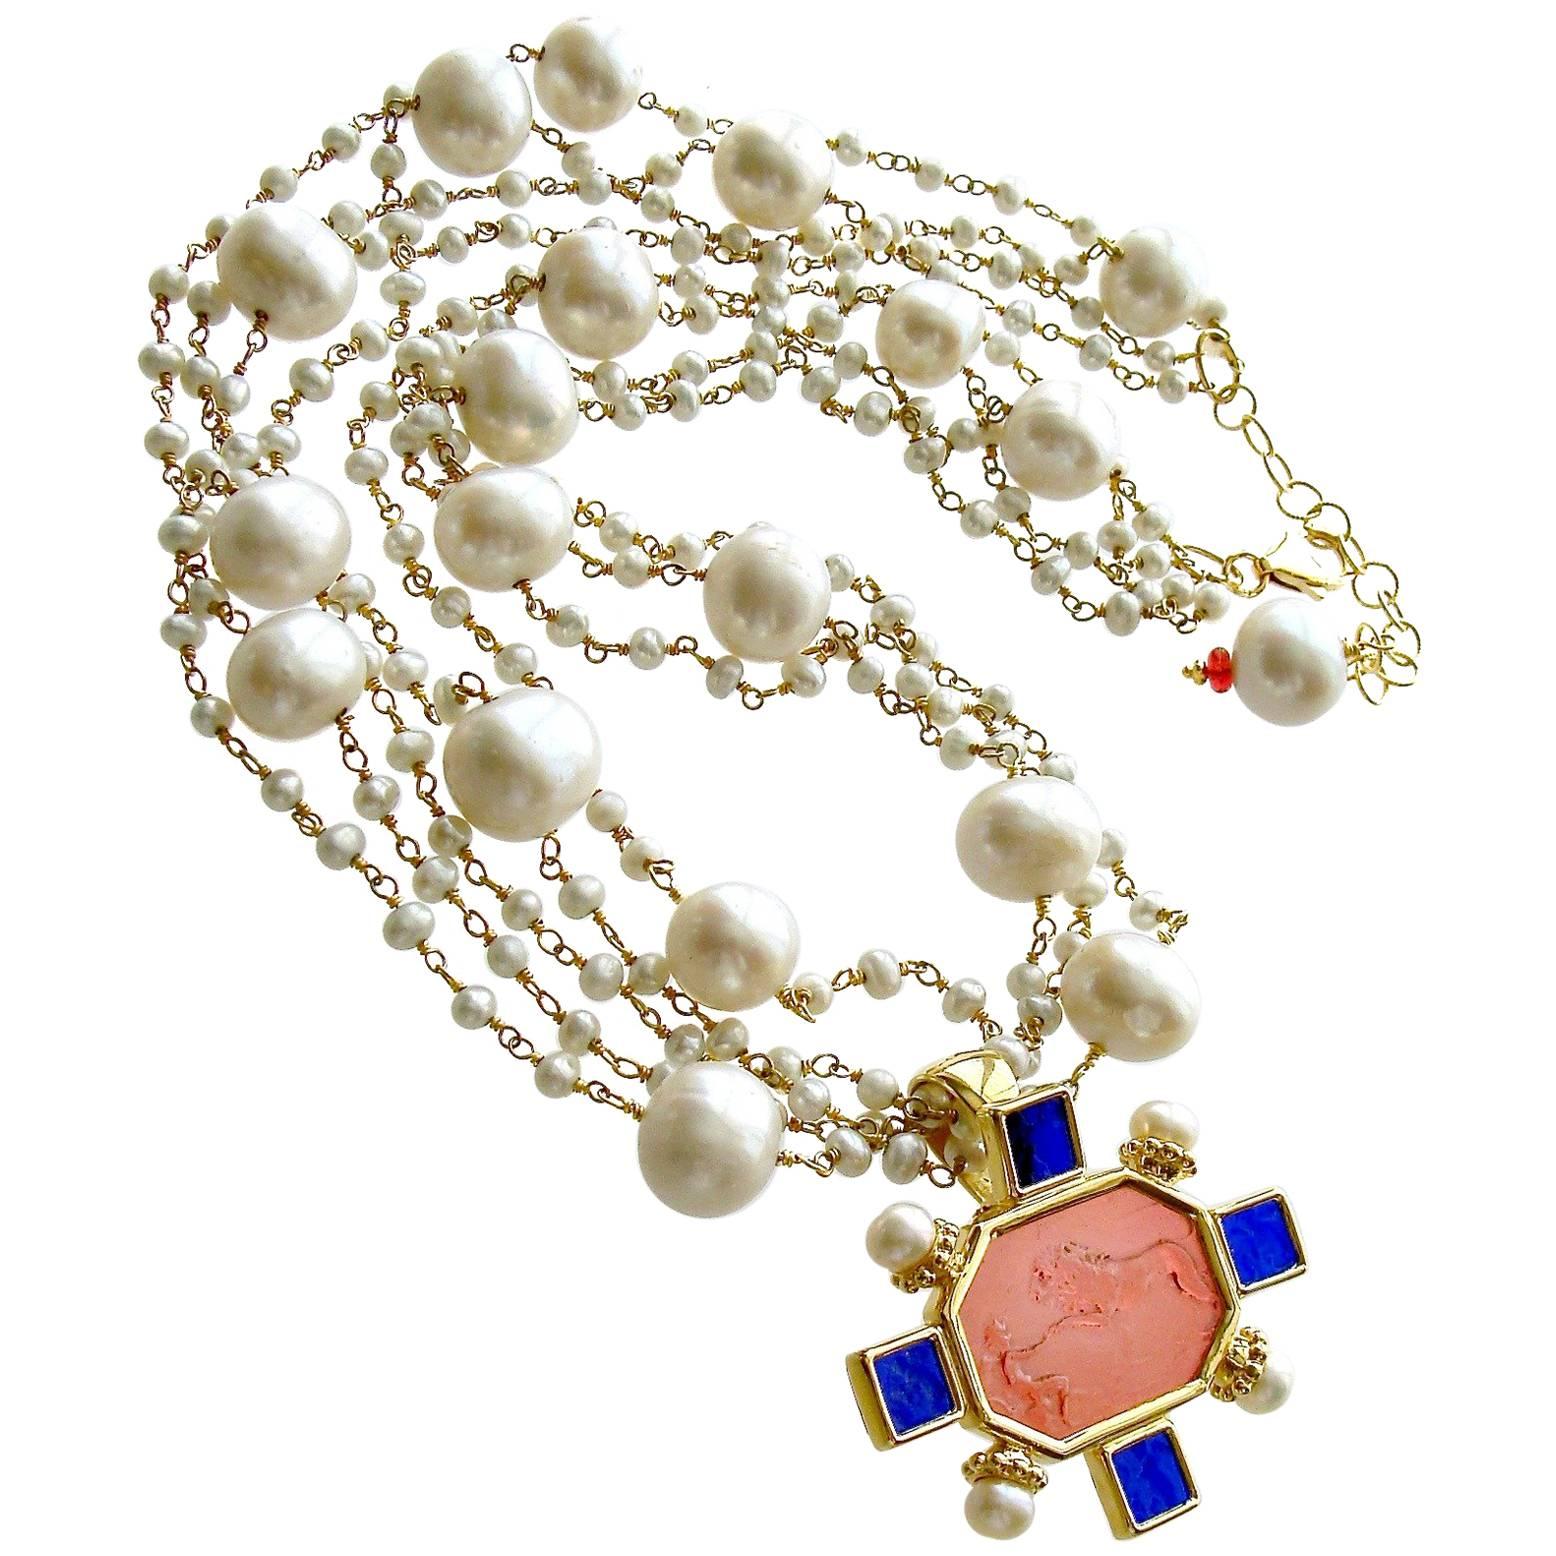 Freshwater Pearls Salmon Pink Cobalt Blue Venetian Glass Intaglio Cameo Necklace